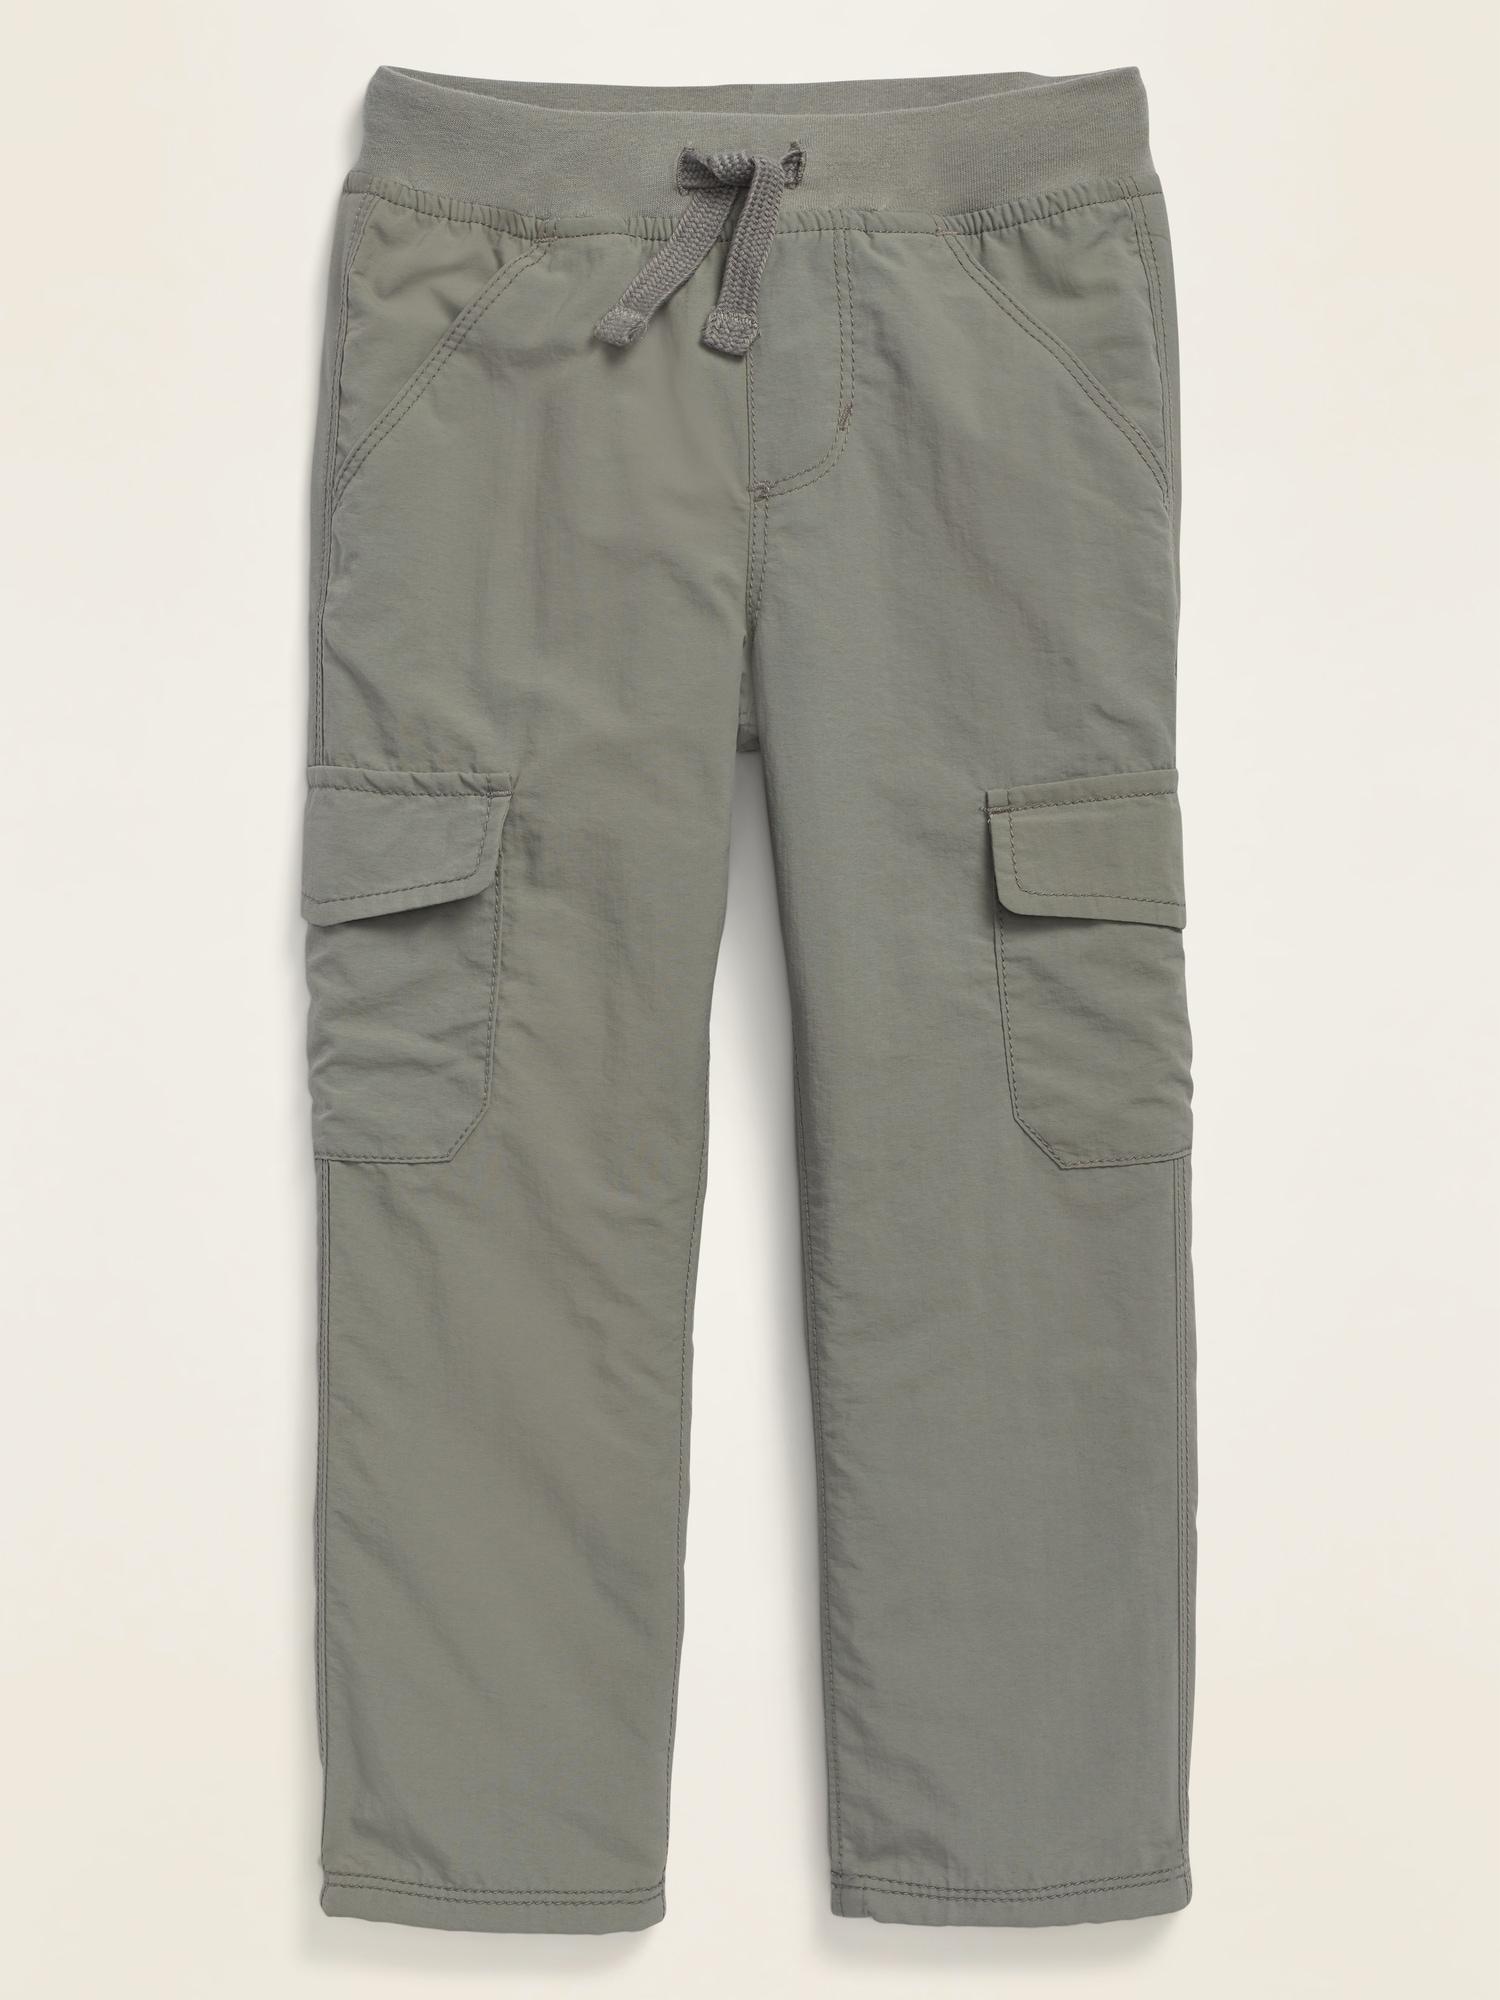 boys lined cargo pants